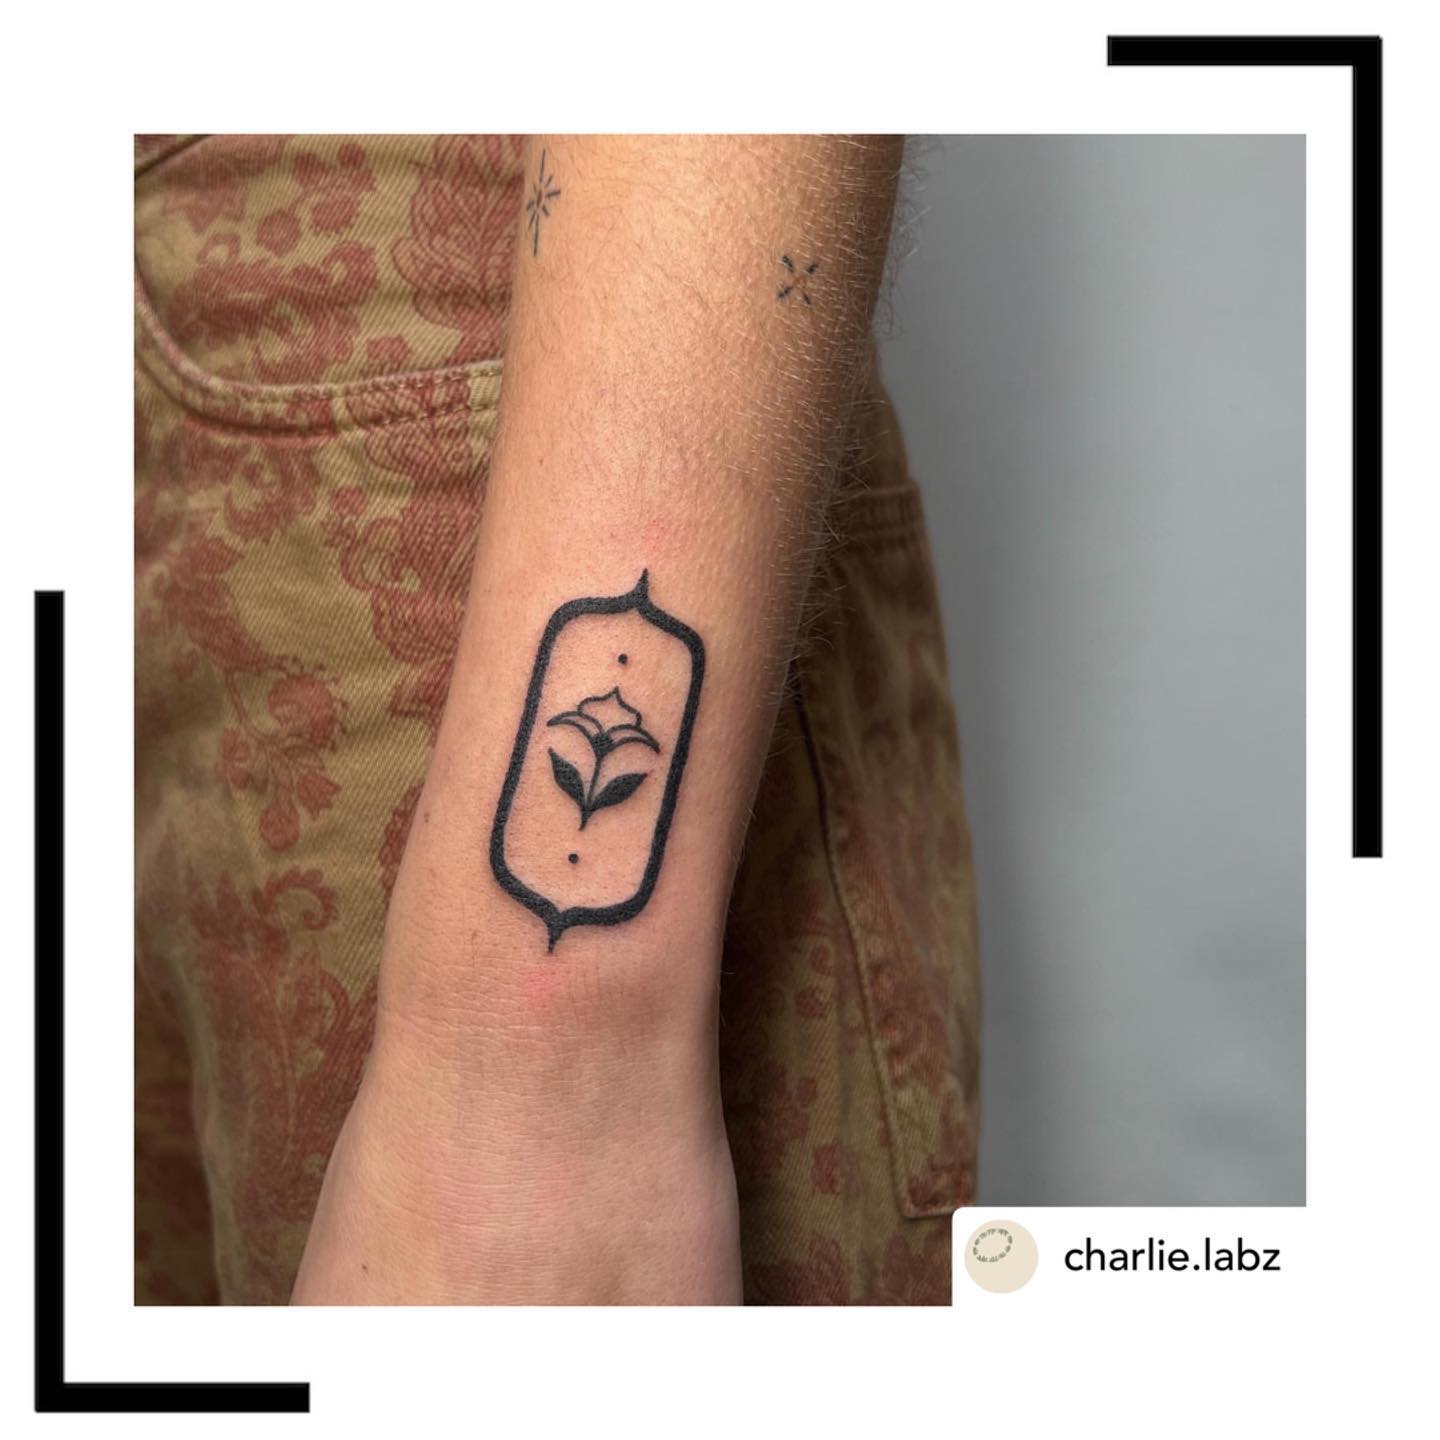 Tattoo by @charlie.labz Link in bio to book. 🖤